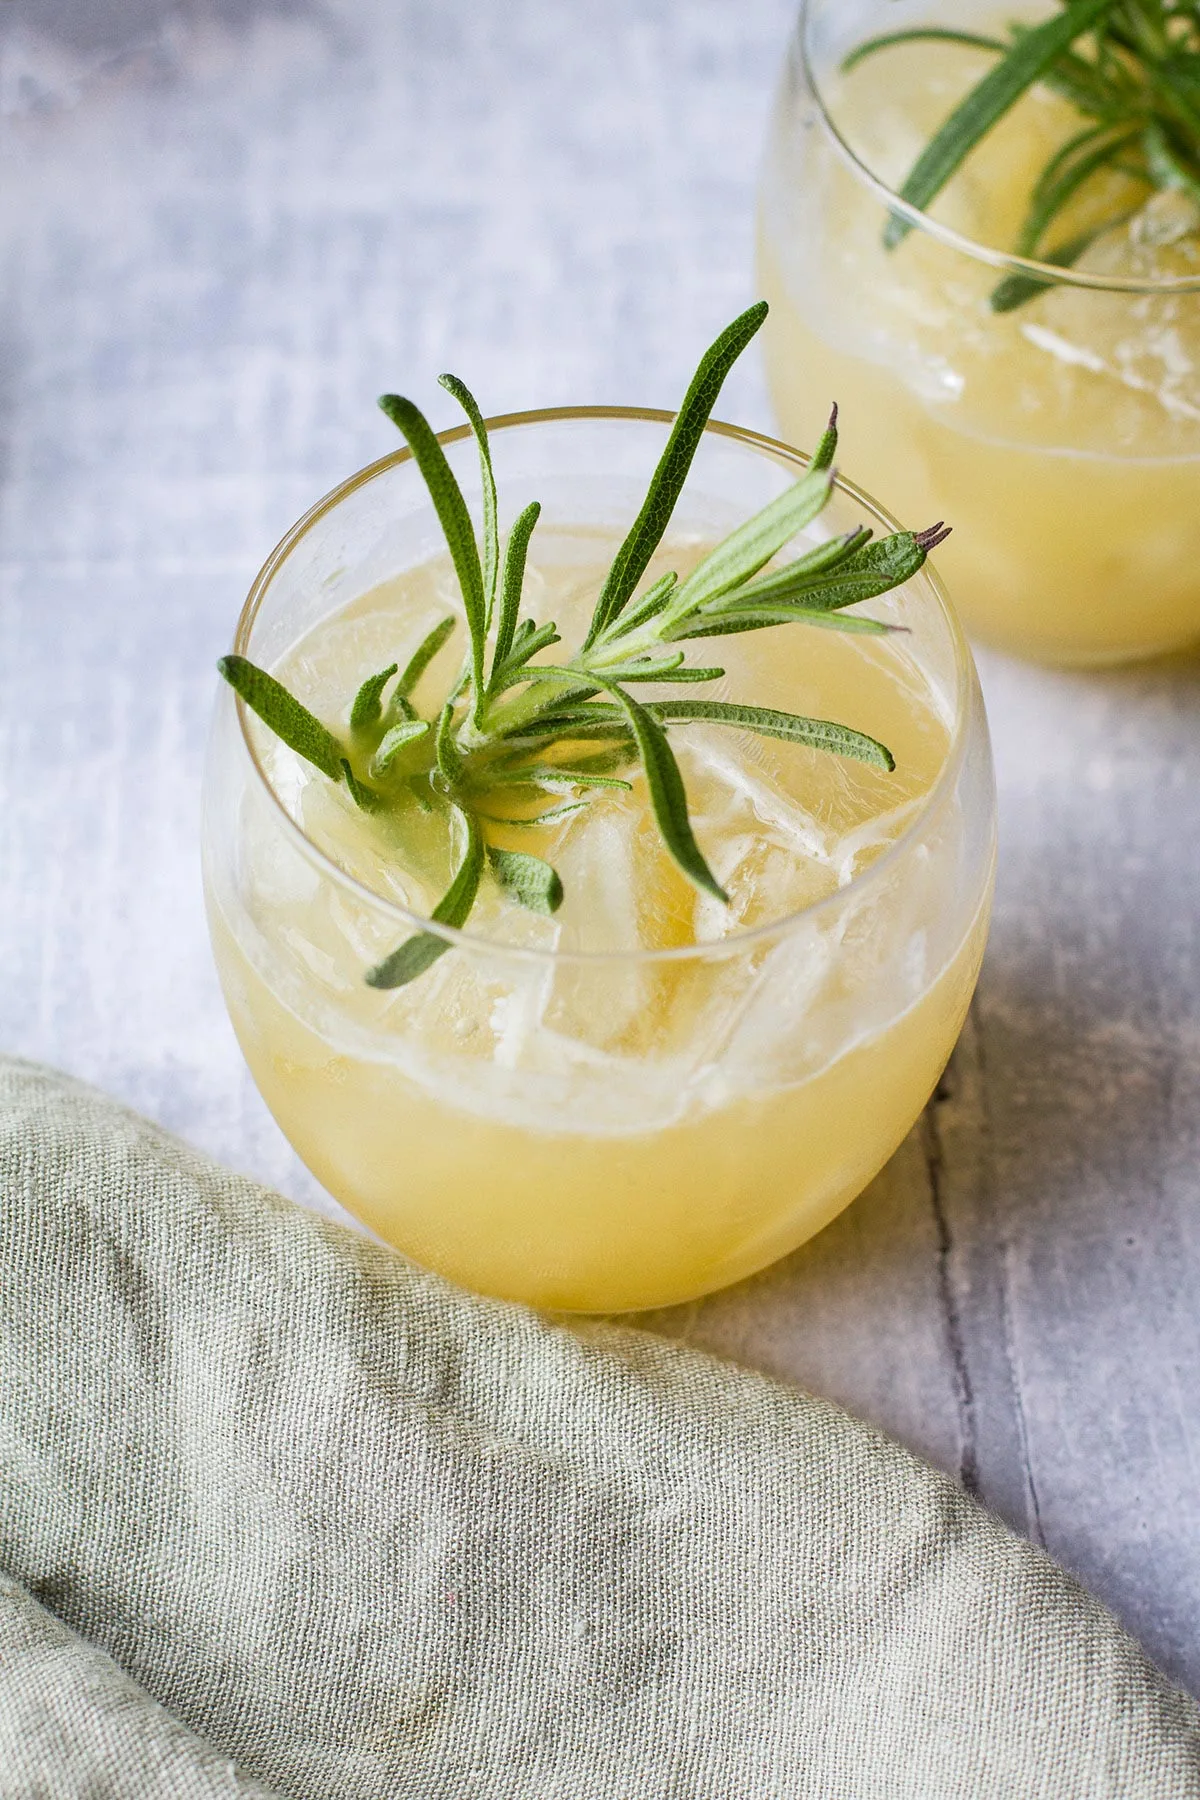 Round glass filled with a whiskey drink and garnished with fresh rosemary.